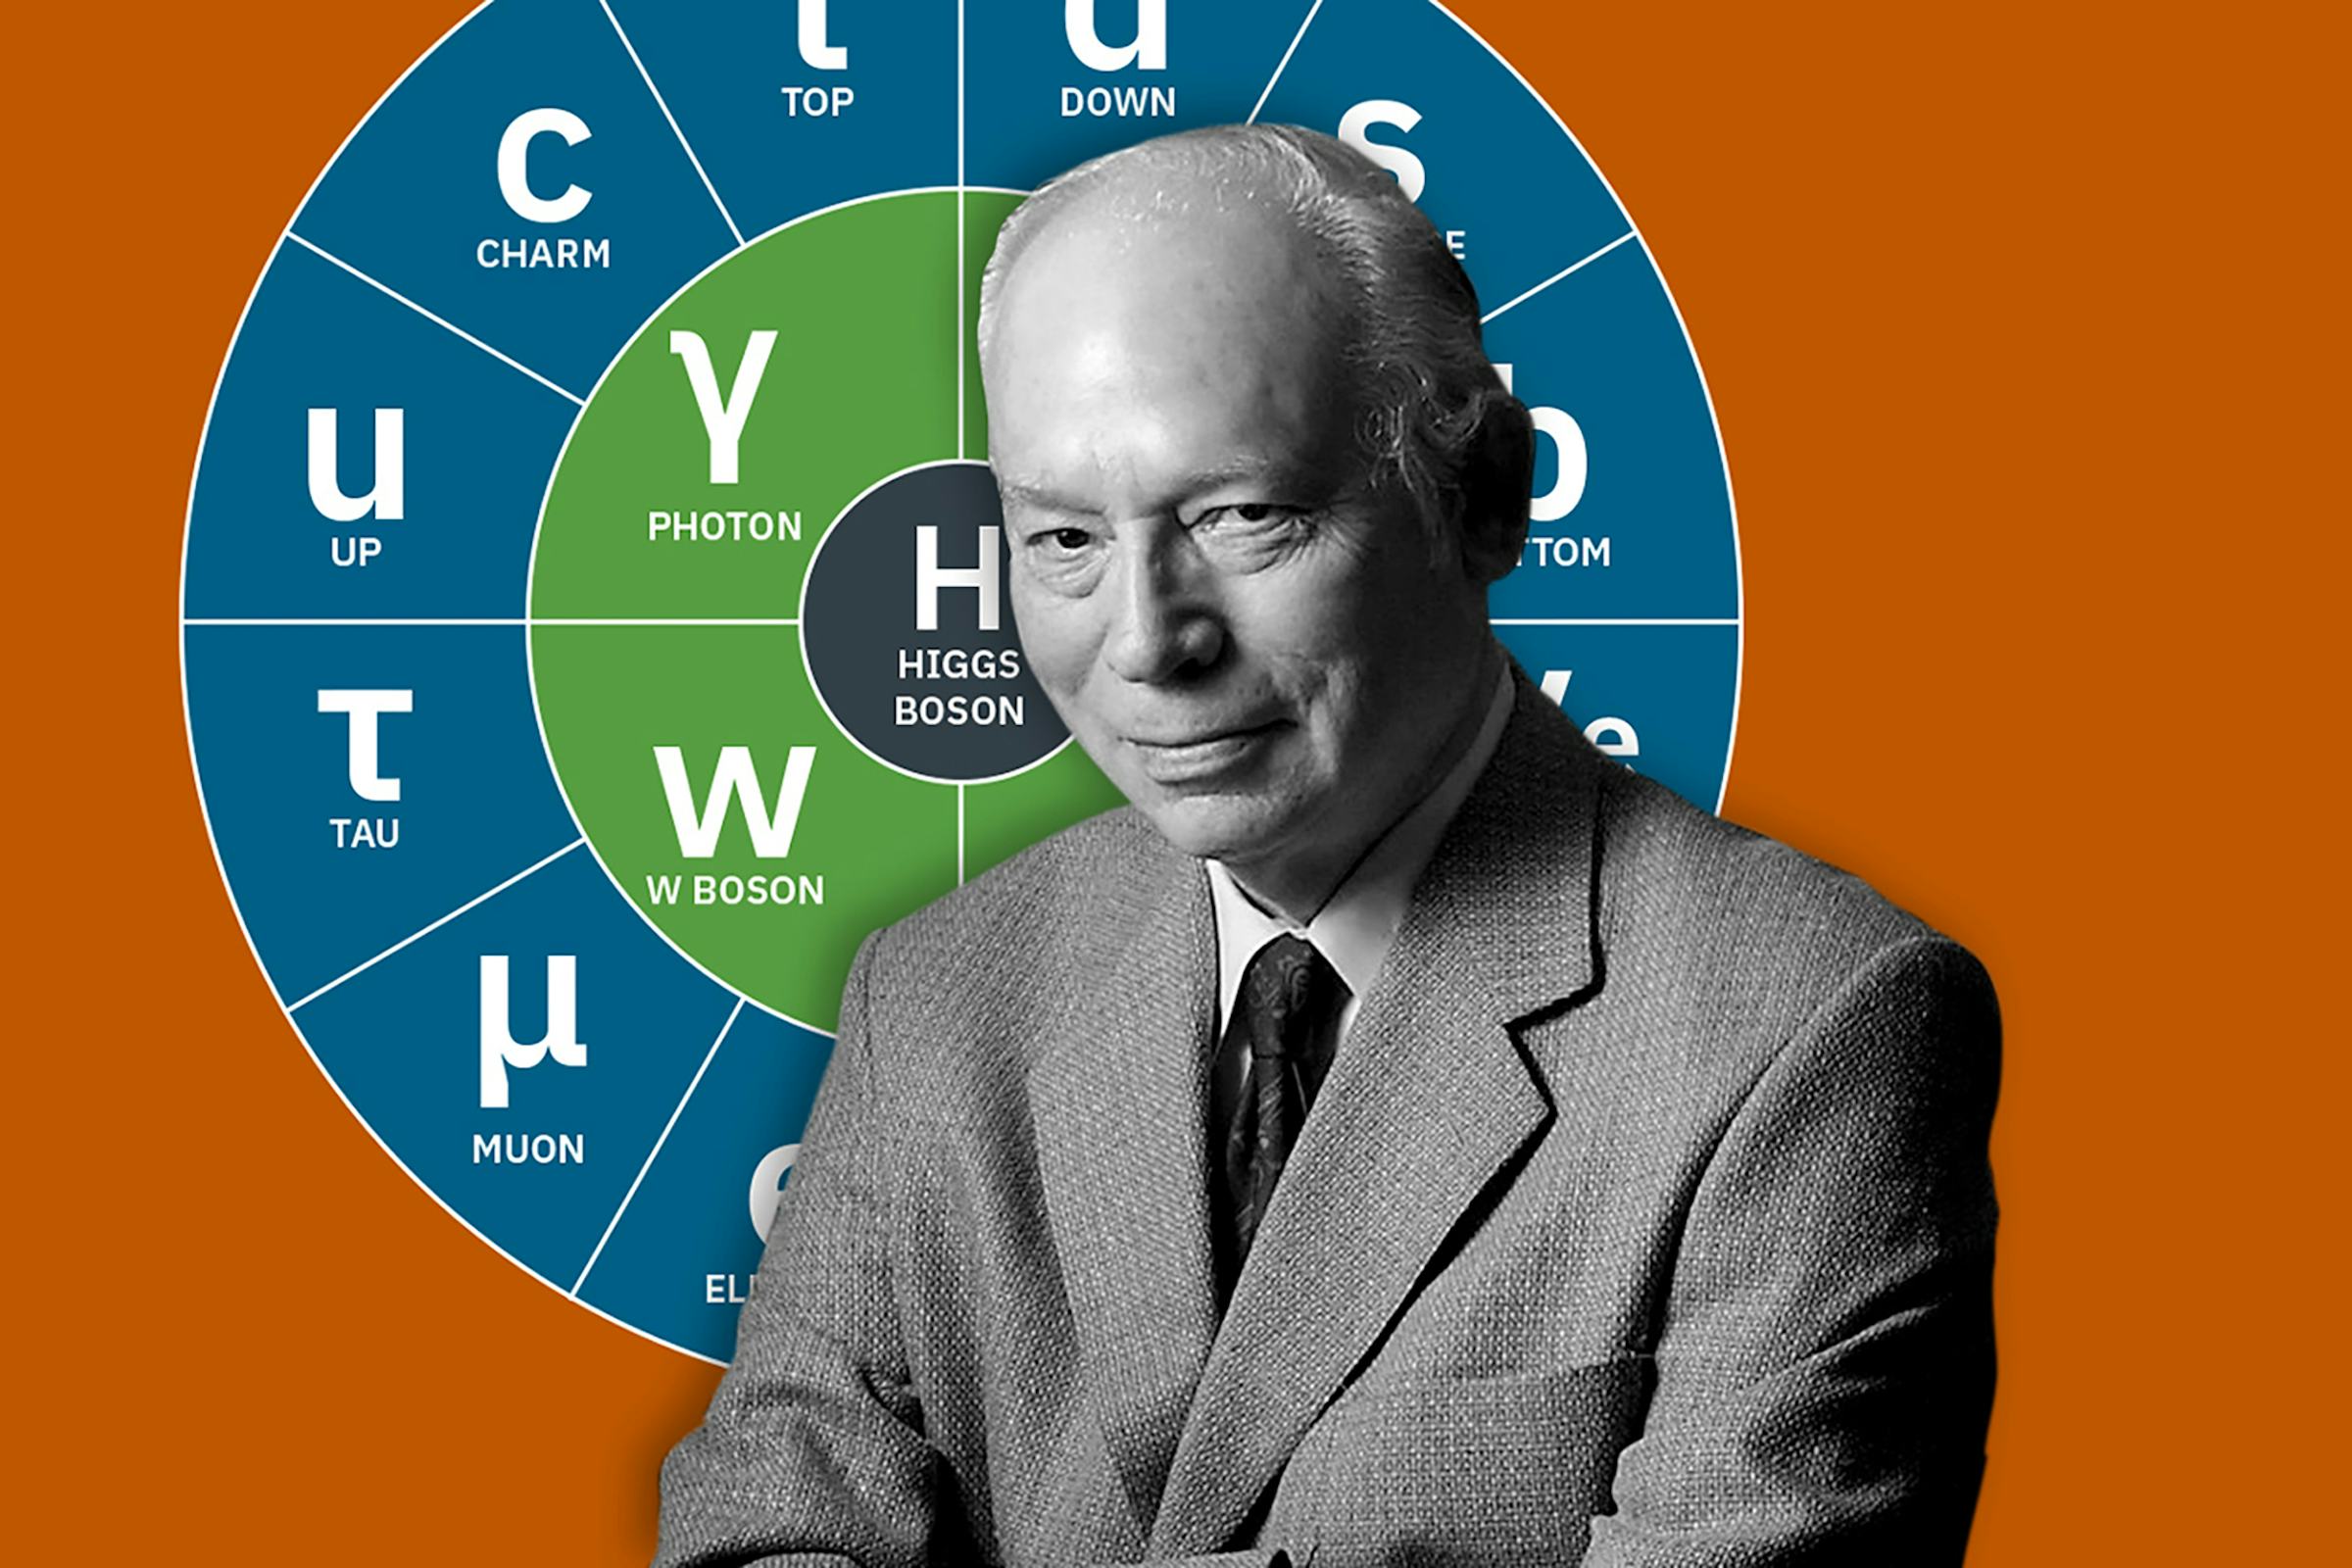 Portrait of a man in a suit with arms crossed in front of an illustration of the Standard Model of Physics